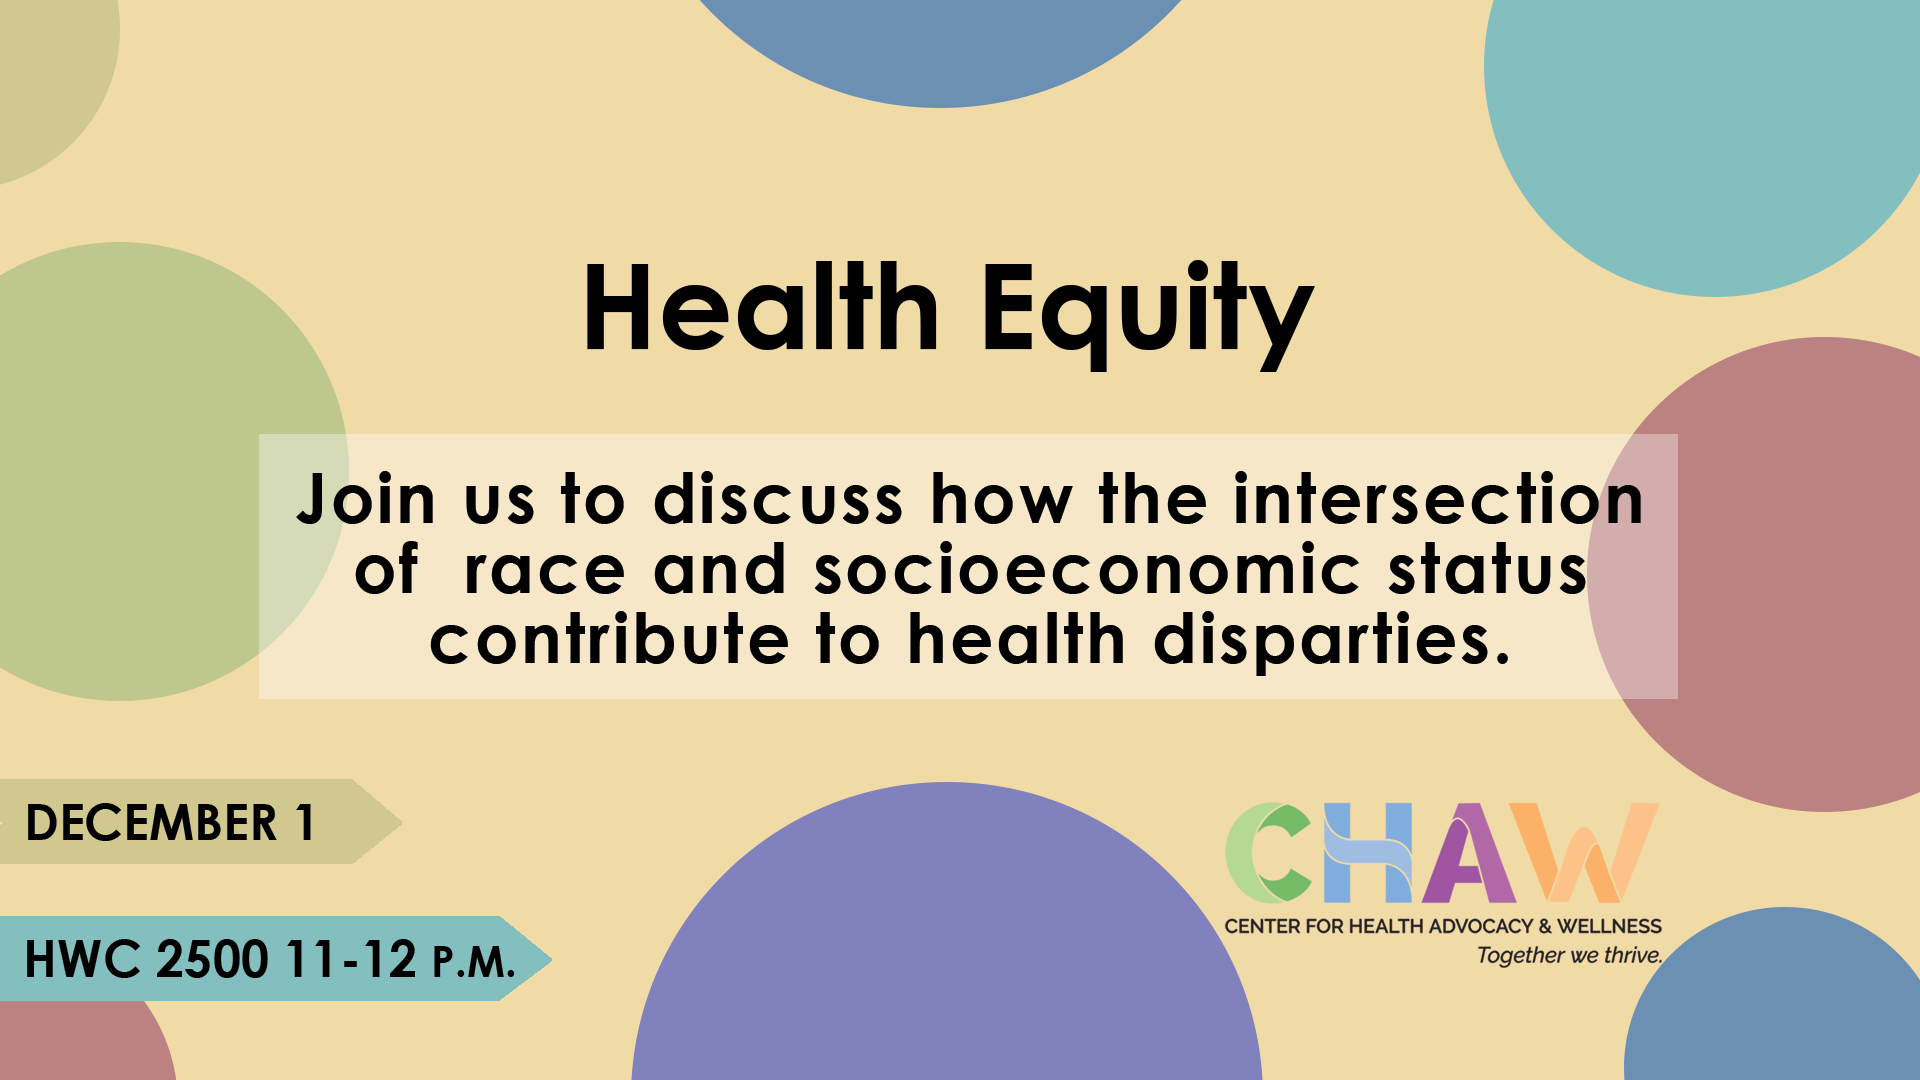 CHAW Workshop: Health Equity, Dec. 1 at HWC 2500 from 11 a.m.-12 p.m.